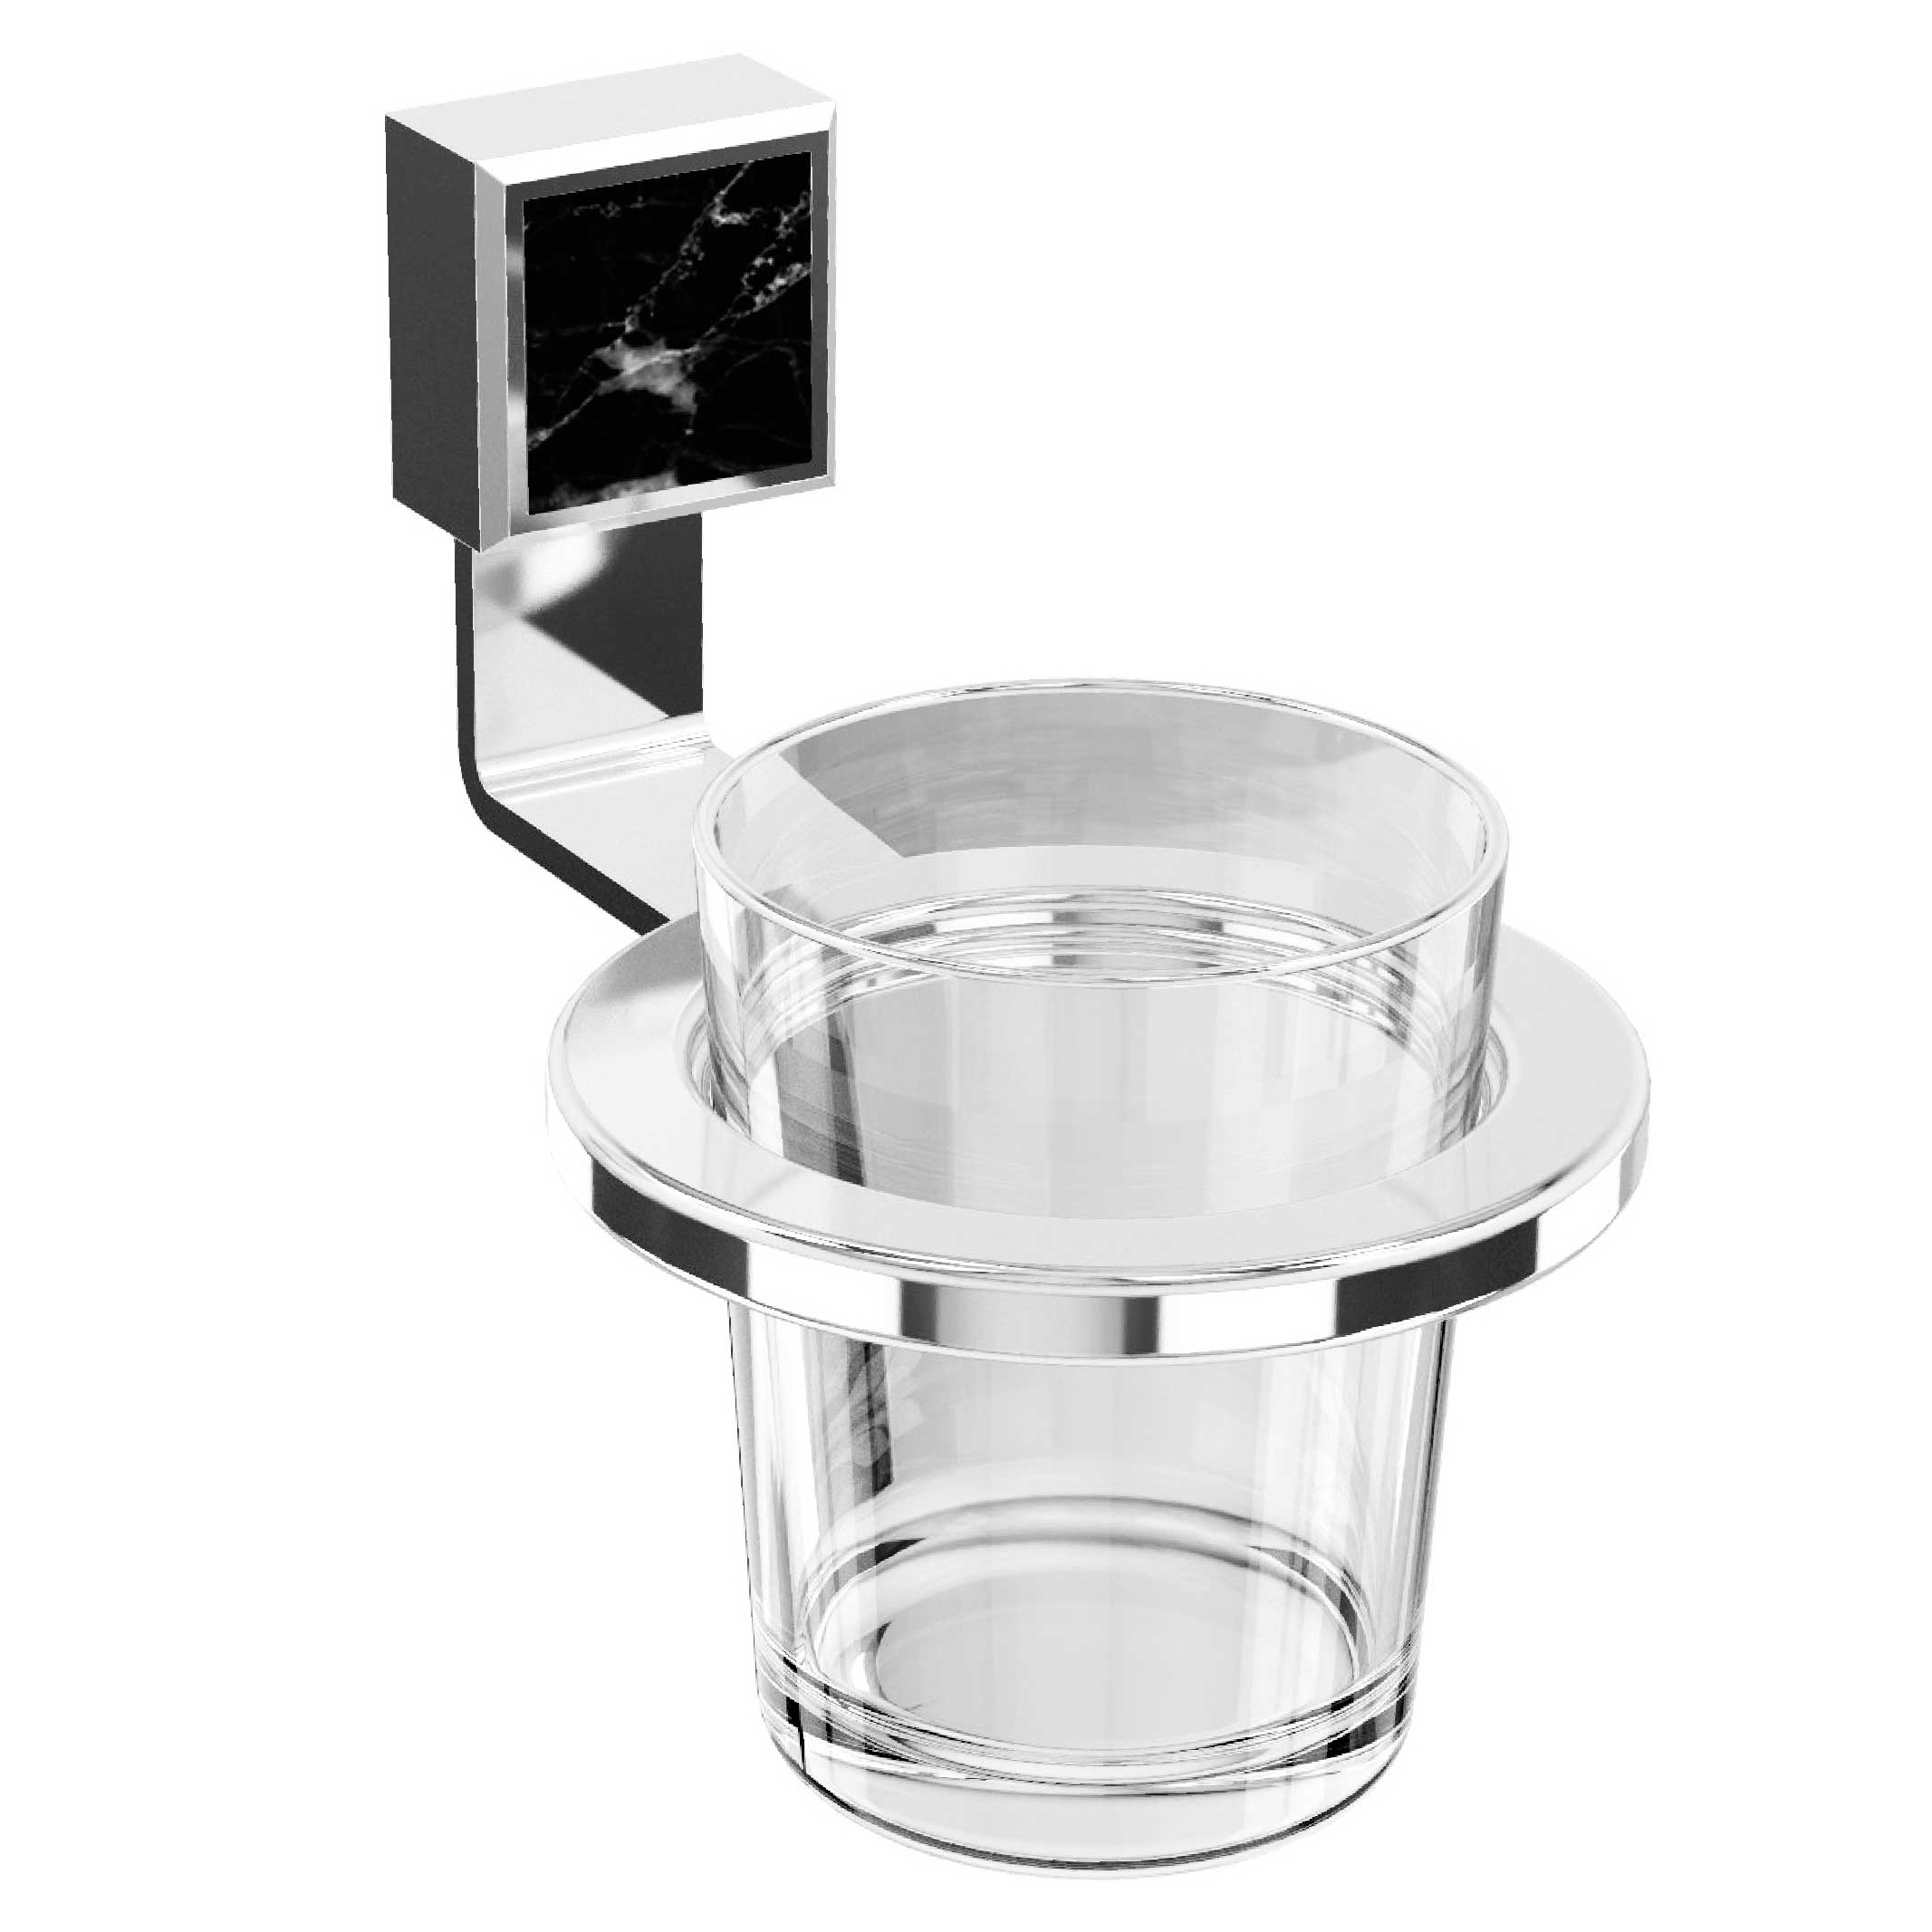 S05-520 Wall mounted glass holder